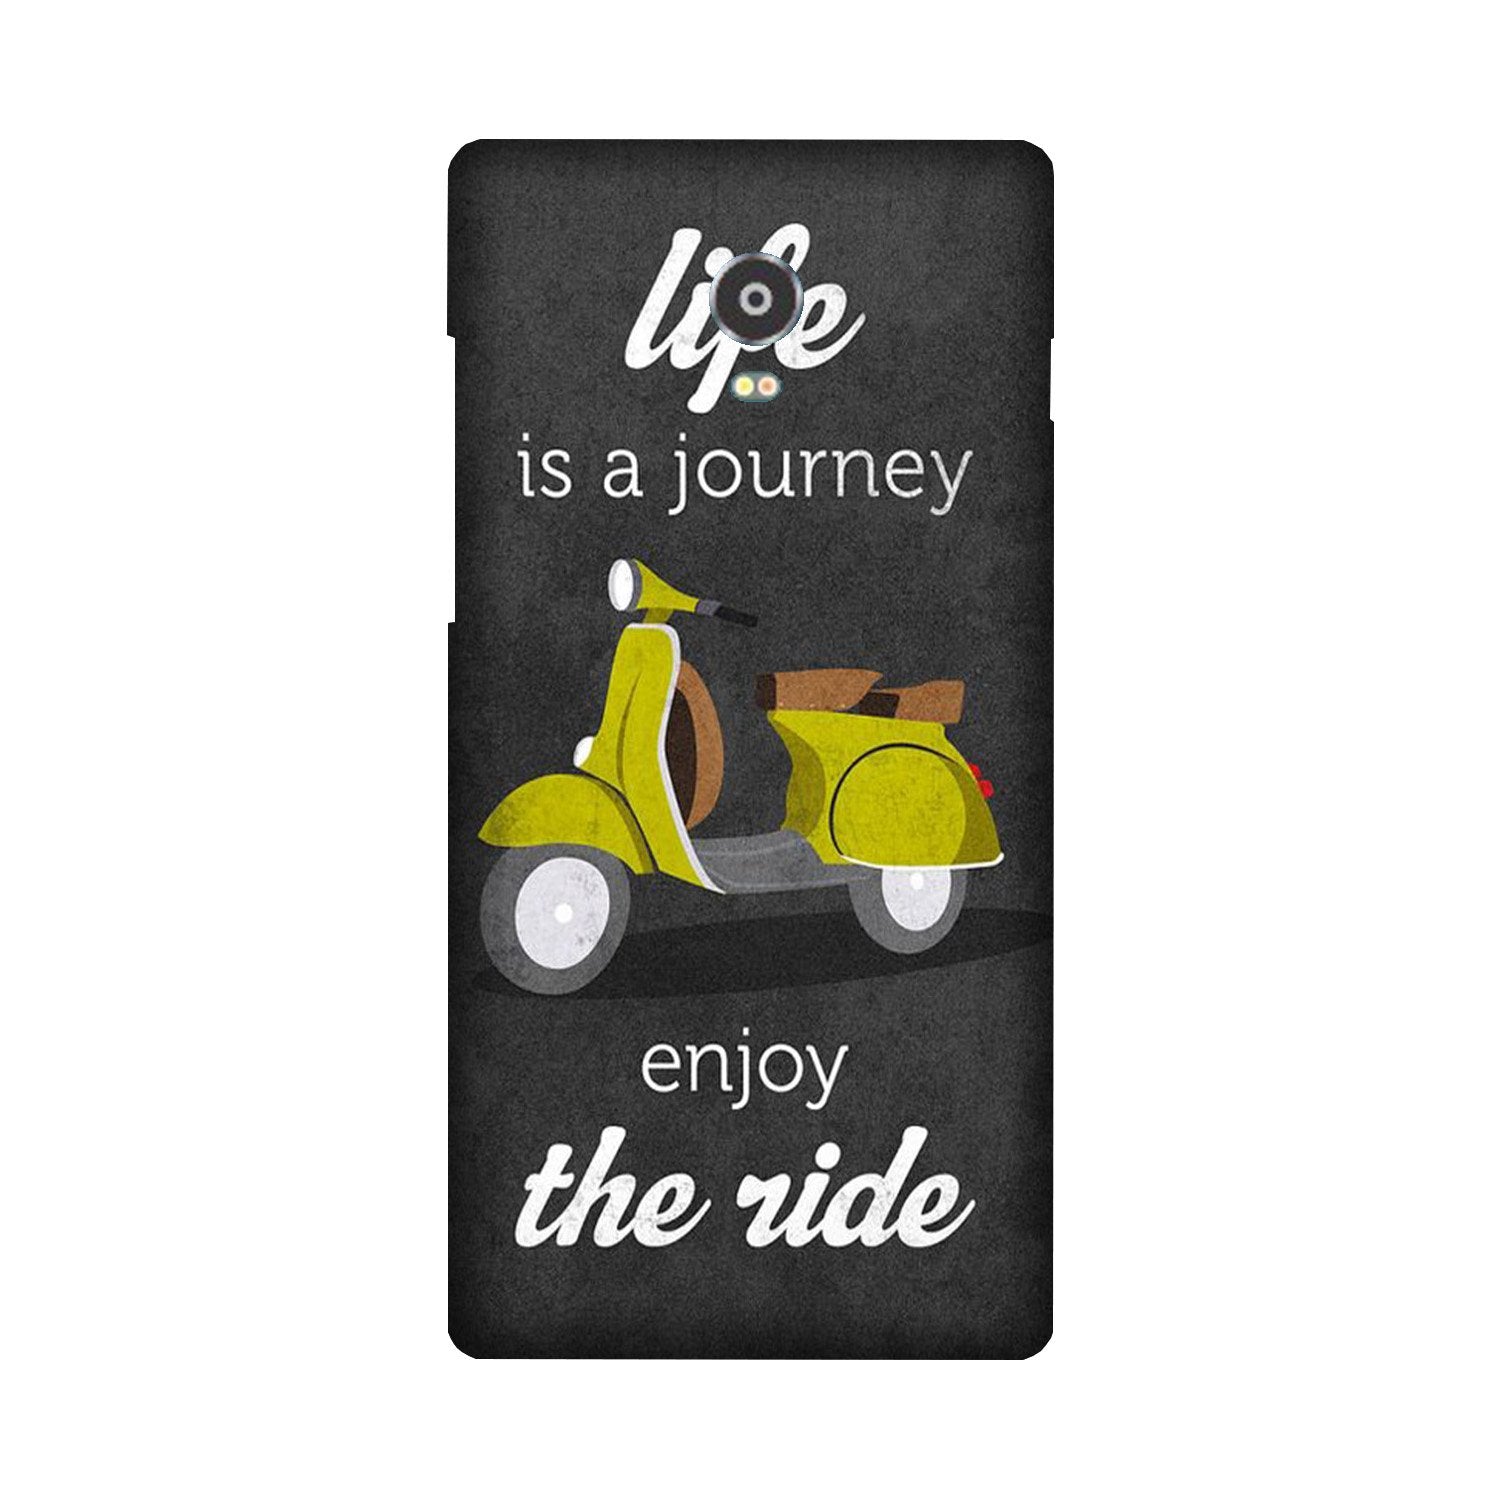 Life is a Journey Case for Lenovo Vibe P1 (Design No. 261)